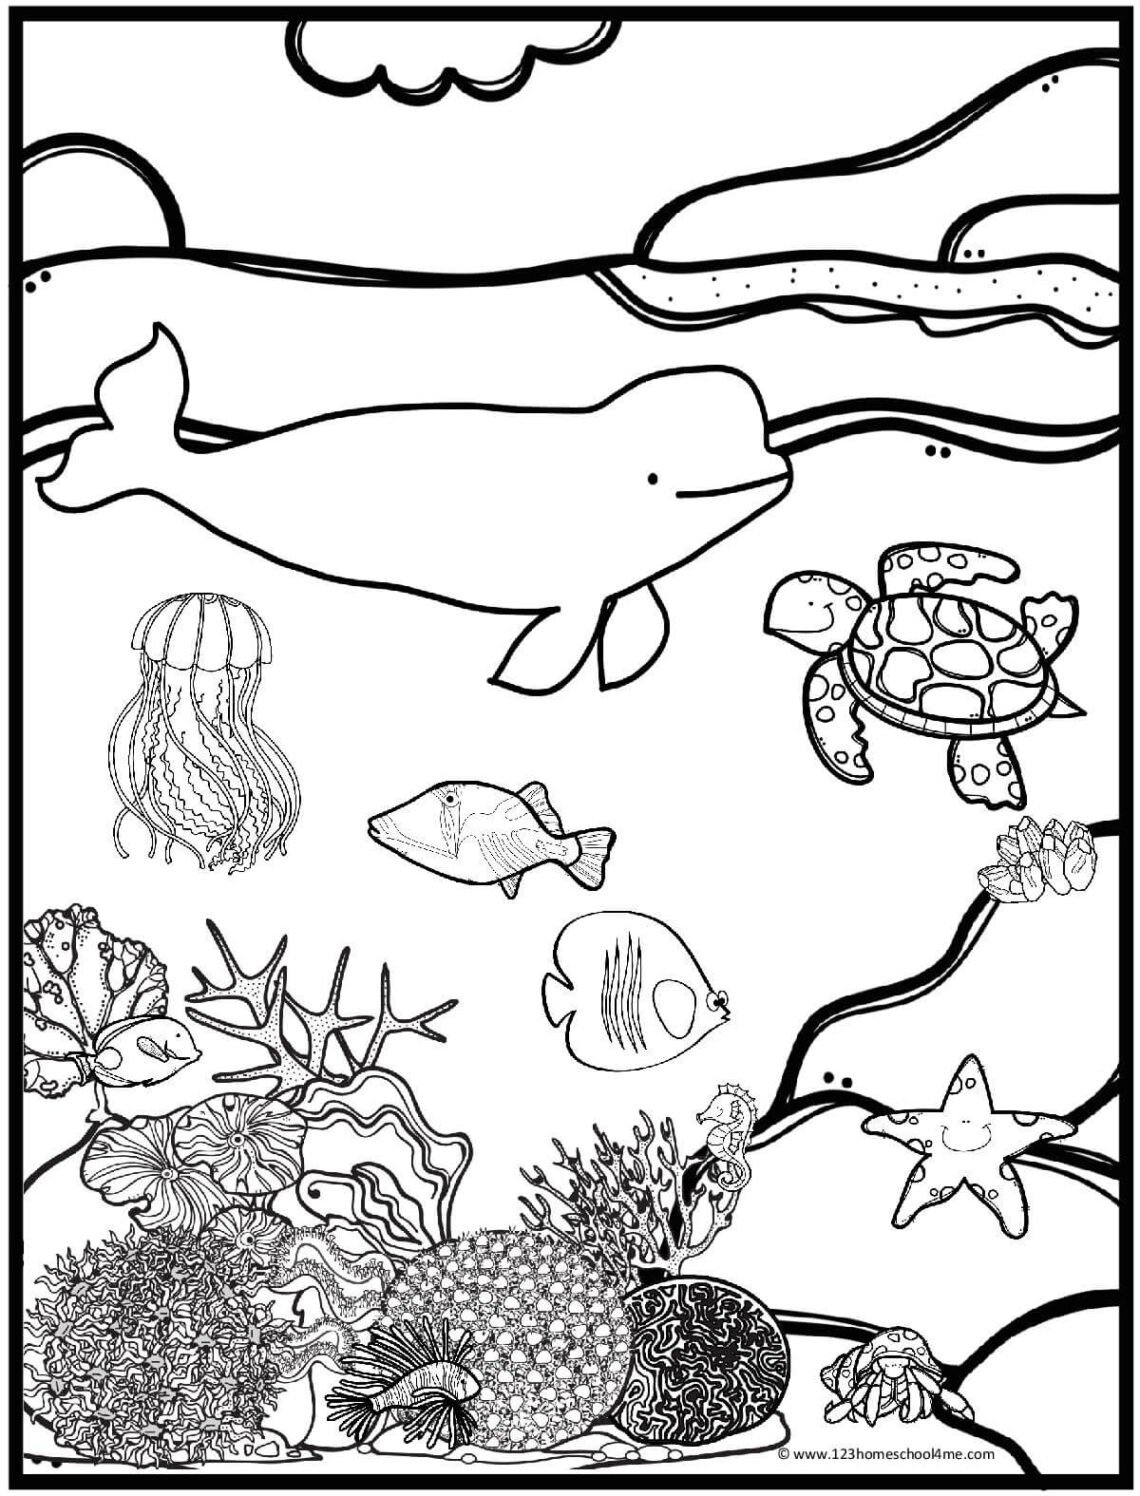 ocean-coloring-page-coloring-pages